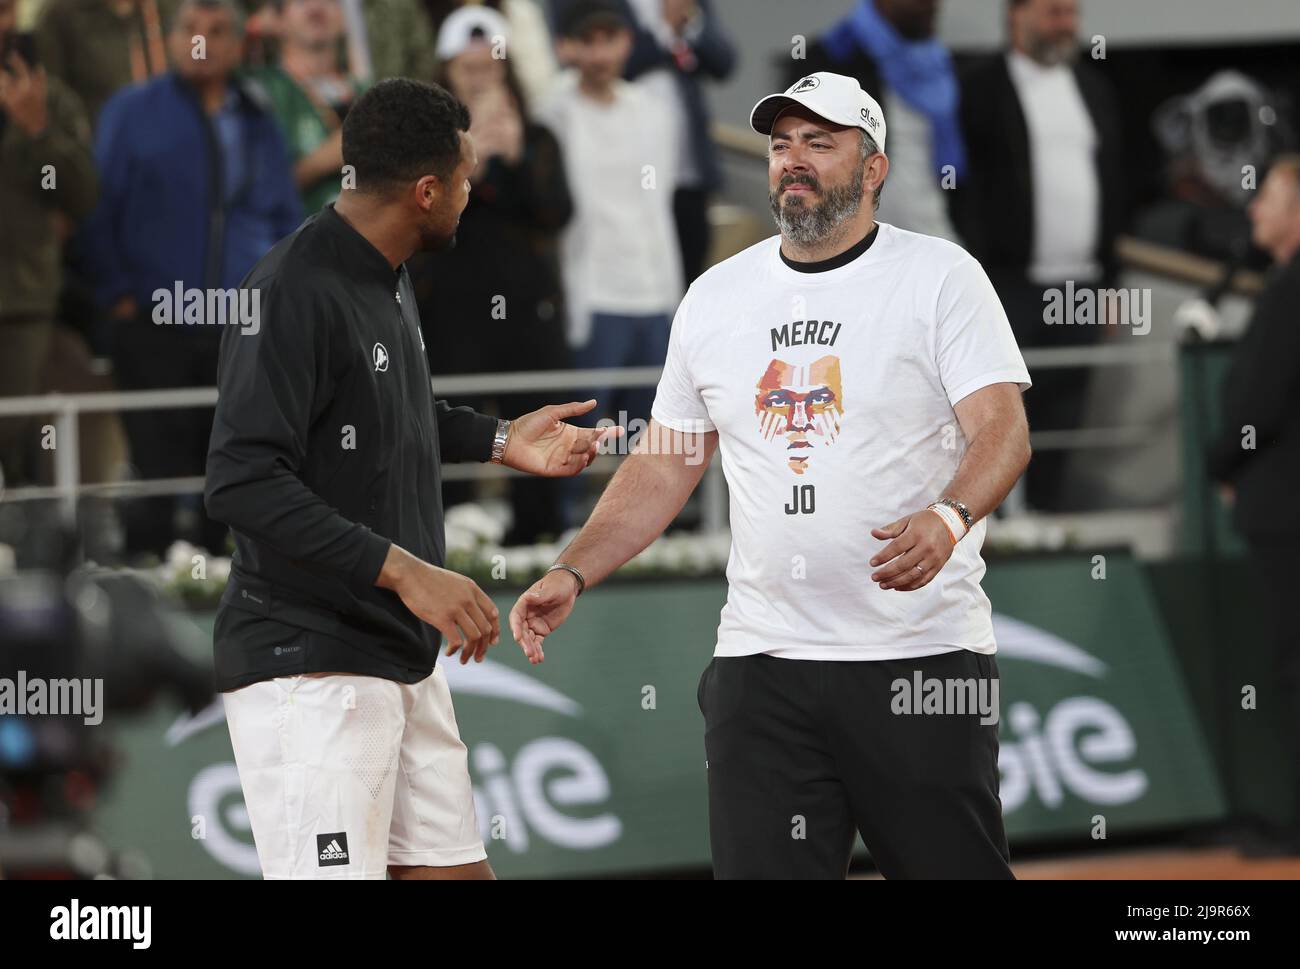 Jo-Wilfried Tsonga of France, his coach Thierry Ascione during a ceremony  celebrating his career after his last tennis match against Casper Ruud of  Norway on day 3 of the French Open 2022,